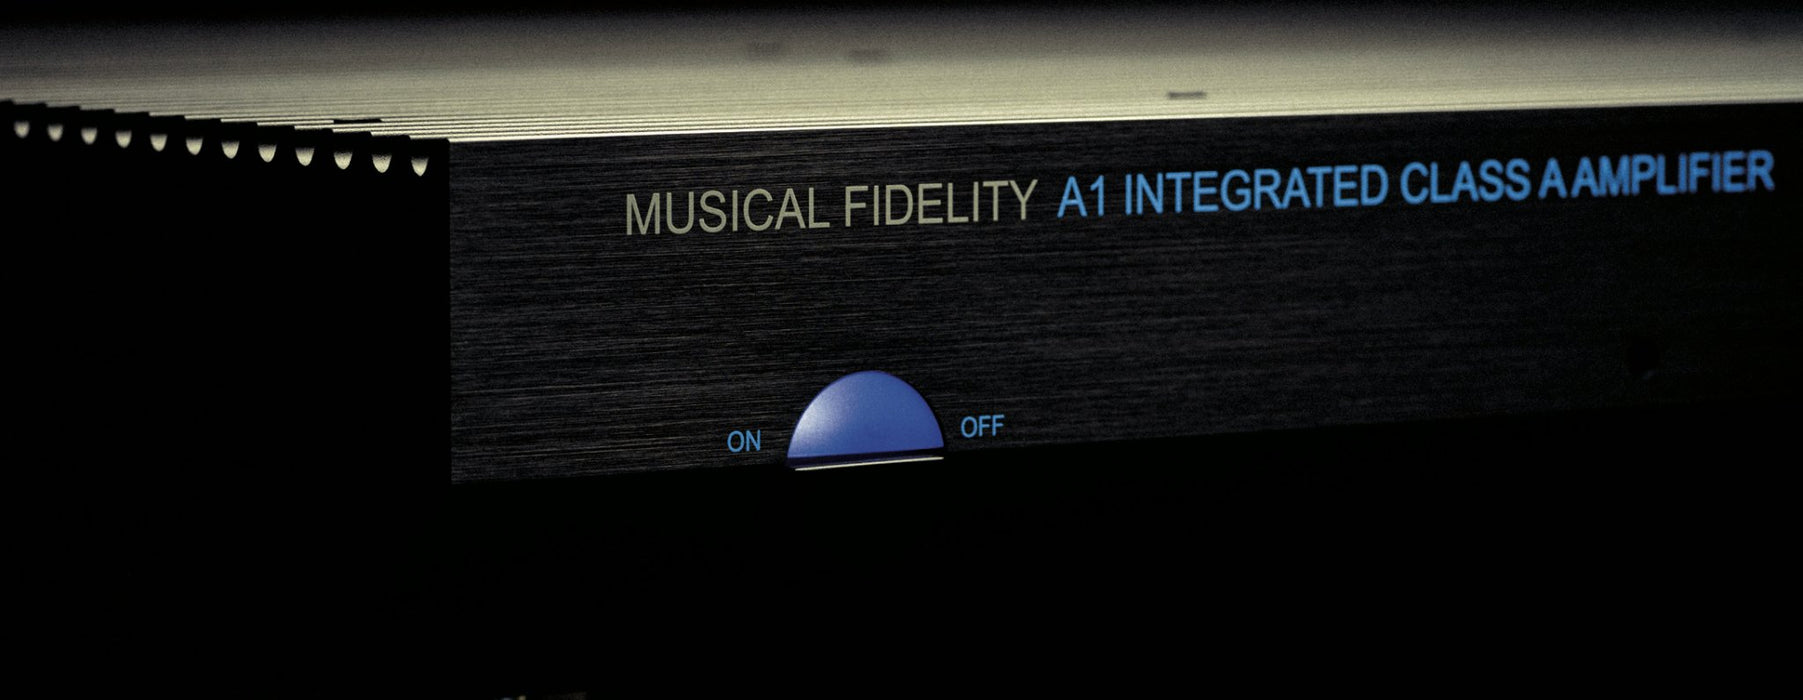 Musical Fidelity A1 Integrated Amplifier - The Audio Co.